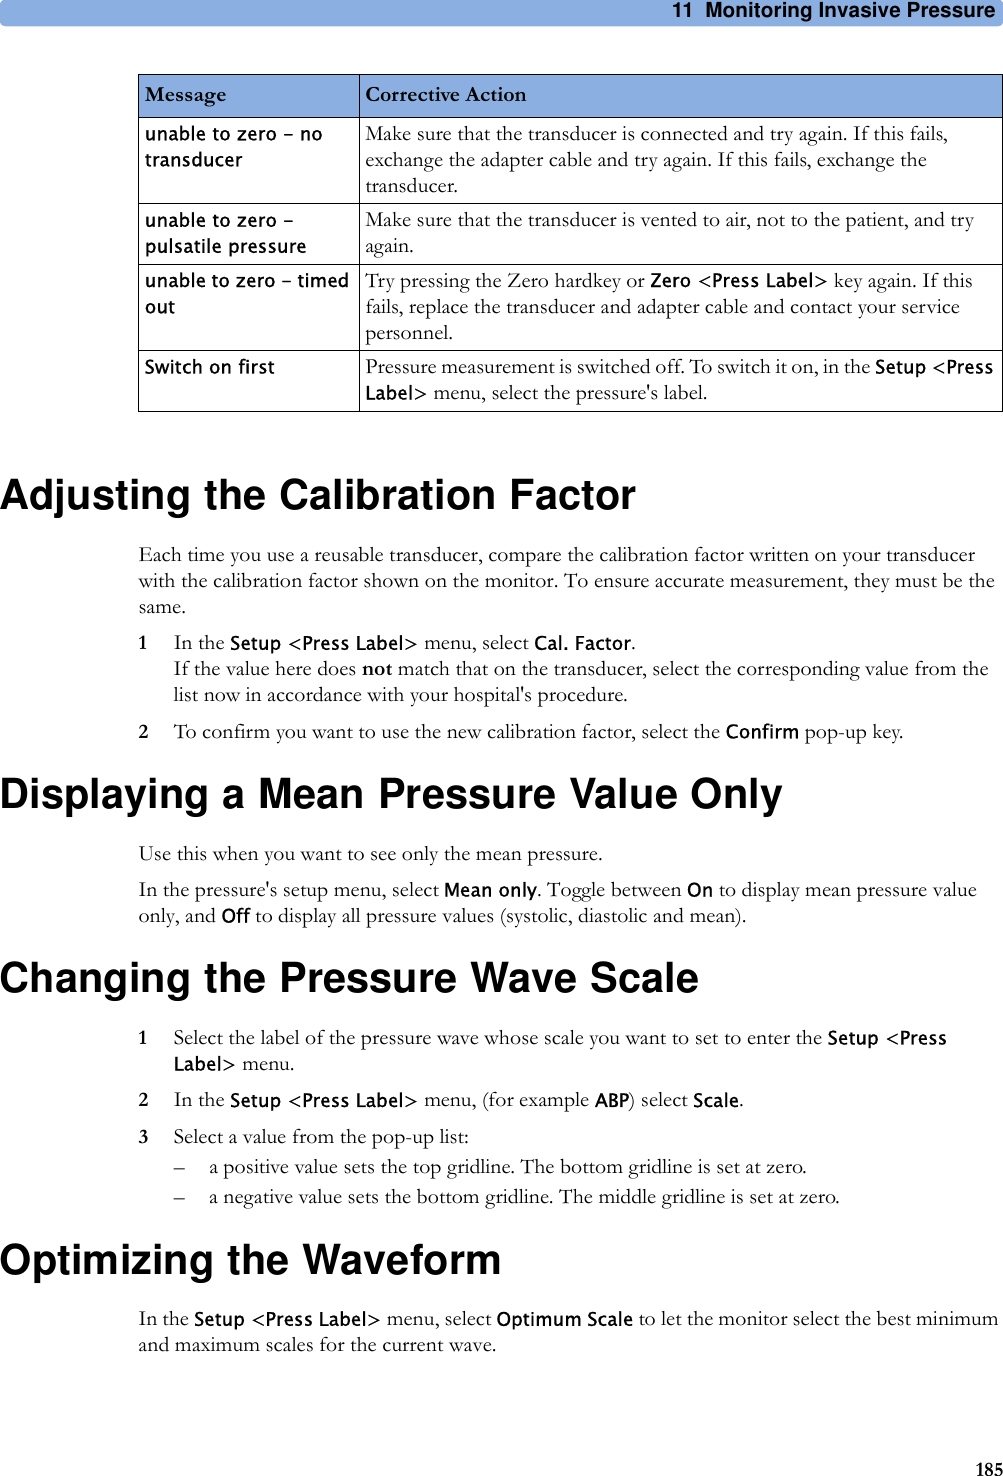 11 Monitoring Invasive Pressure185Adjusting the Calibration FactorEach time you use a reusable transducer, compare the calibration factor written on your transducer with the calibration factor shown on the monitor. To ensure accurate measurement, they must be the same.1In the Setup &lt;Press Label&gt; menu, select Cal. Factor.If the value here does not match that on the transducer, select the corresponding value from the list now in accordance with your hospital&apos;s procedure.2To confirm you want to use the new calibration factor, select the Confirm pop-up key.Displaying a Mean Pressure Value OnlyUse this when you want to see only the mean pressure.In the pressure&apos;s setup menu, select Mean only. Toggle between On to display mean pressure value only, and Off to display all pressure values (systolic, diastolic and mean).Changing the Pressure Wave Scale1Select the label of the pressure wave whose scale you want to set to enter the Setup &lt;Press Label&gt; menu.2In the Setup &lt;Press Label&gt; menu, (for example ABP) select Scale.3Select a value from the pop-up list:– a positive value sets the top gridline. The bottom gridline is set at zero.– a negative value sets the bottom gridline. The middle gridline is set at zero.Optimizing the WaveformIn the Setup &lt;Press Label&gt; menu, select Optimum Scale to let the monitor select the best minimum and maximum scales for the current wave.unable to zero - no transducerMake sure that the transducer is connected and try again. If this fails, exchange the adapter cable and try again. If this fails, exchange the transducer.unable to zero - pulsatile pressureMake sure that the transducer is vented to air, not to the patient, and try again.unable to zero - timed outTry pressing the Zero hardkey or Zero &lt;Press Label&gt; key again. If this fails, replace the transducer and adapter cable and contact your service personnel.Switch on first Pressure measurement is switched off. To switch it on, in the Setup &lt;Press Label&gt; menu, select the pressure&apos;s label.Message Corrective Action